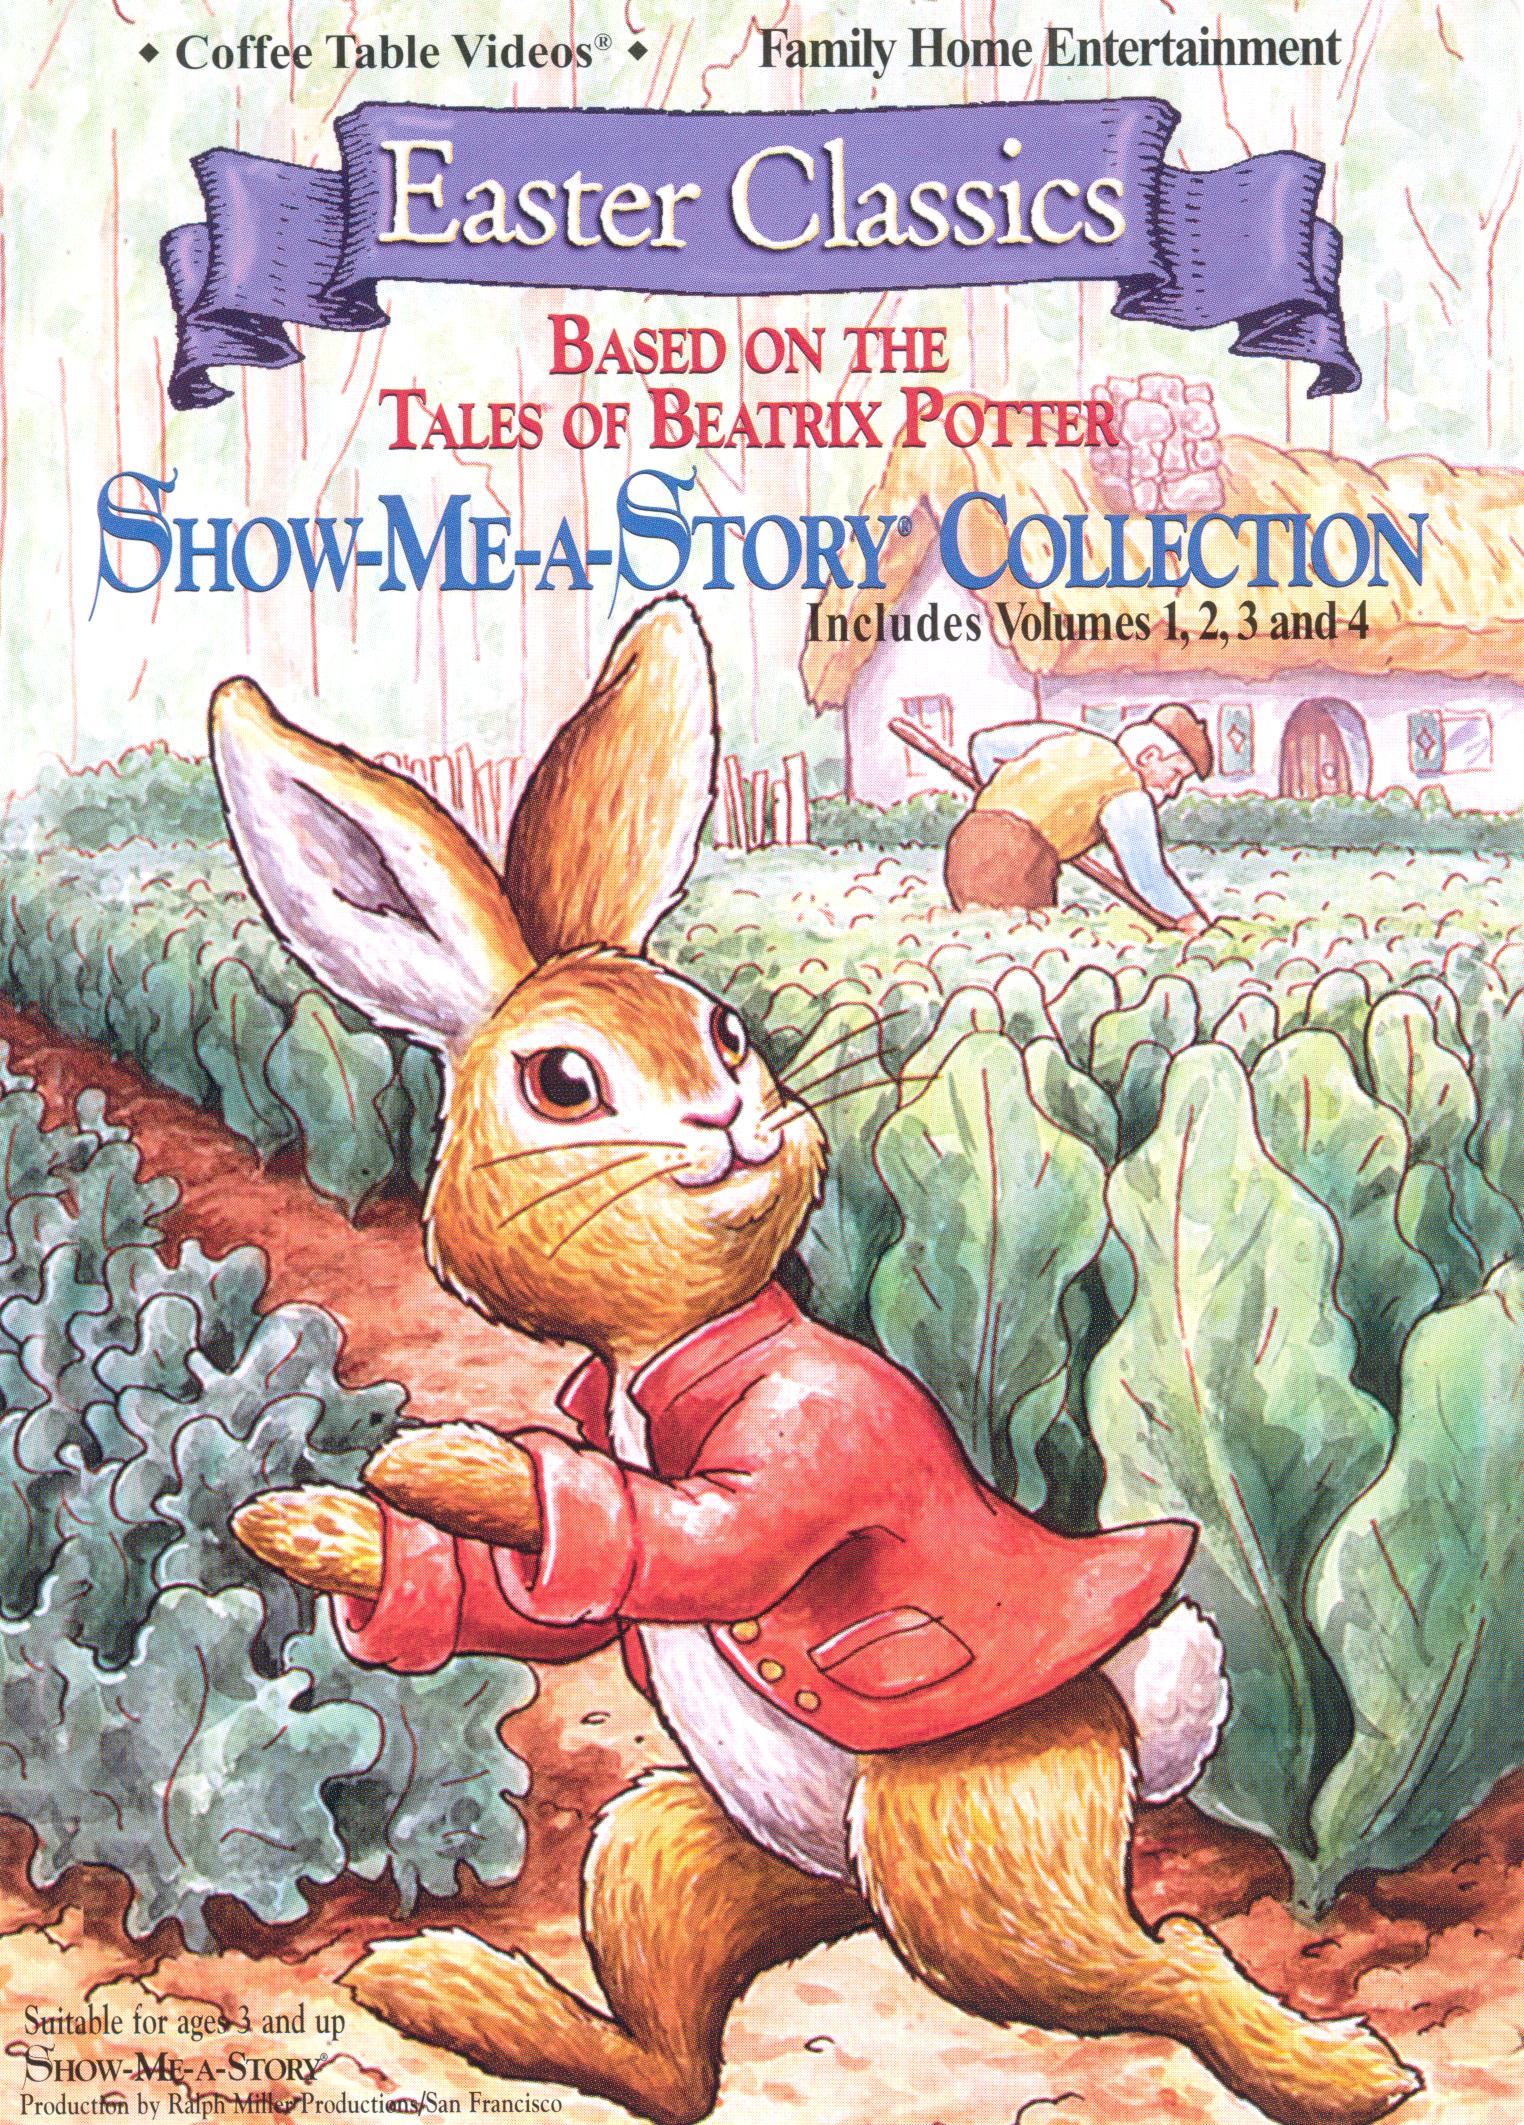 Best Buy Based On The Tales Of Beatrix Potter Show Me A Story Collection Vol 1 4 [dvd]